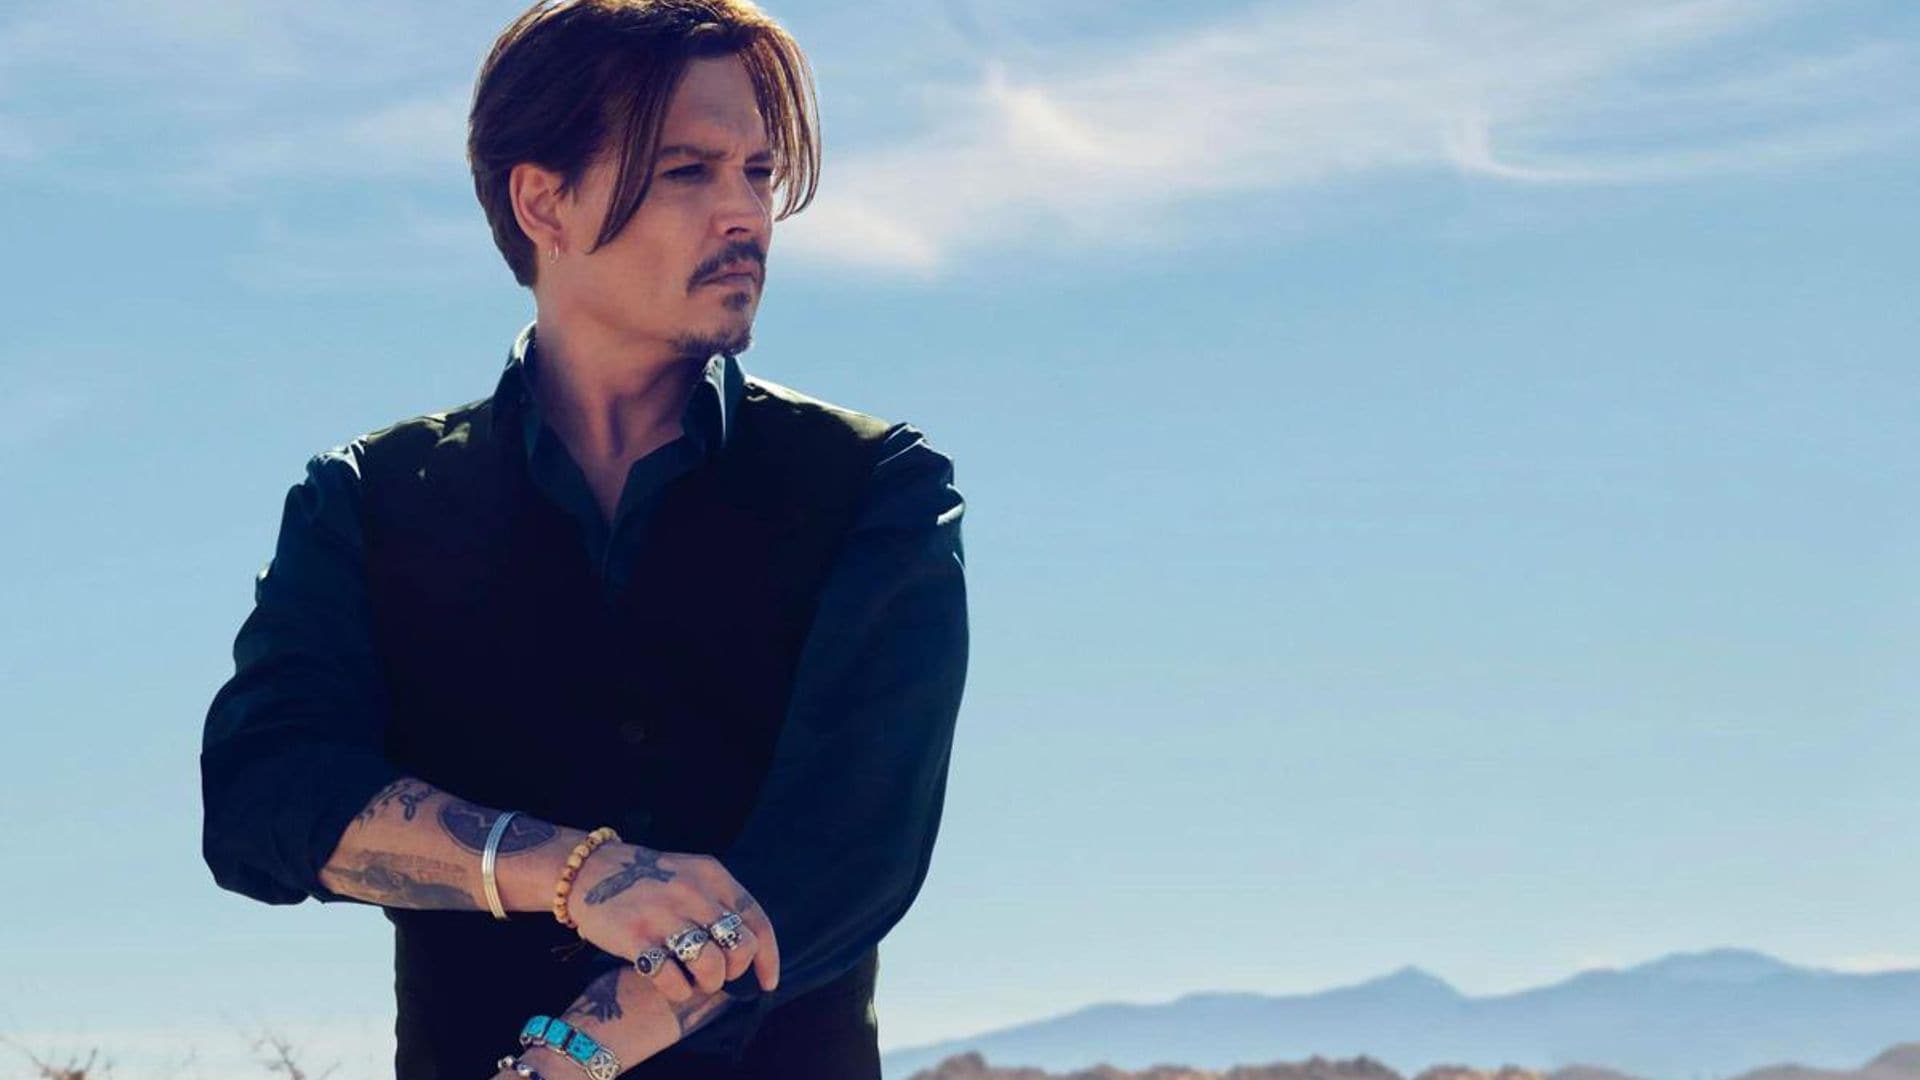 Johnny Depp signed the biggest contract for a men’s fragrance to date